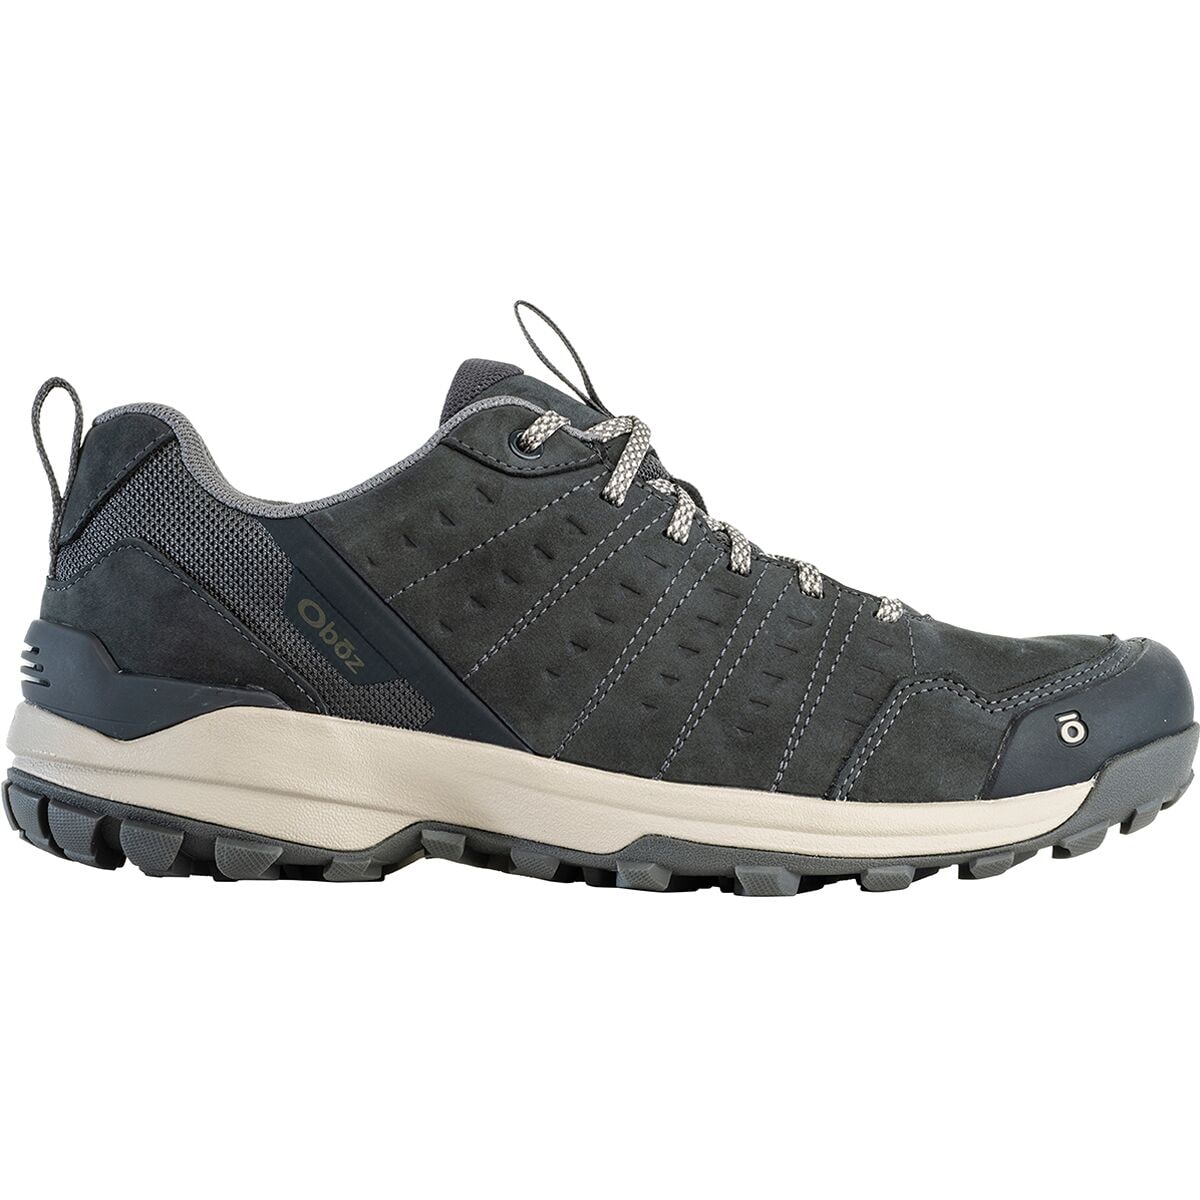 Sypes Low Leather B-DRY Hiking Shoe - Men